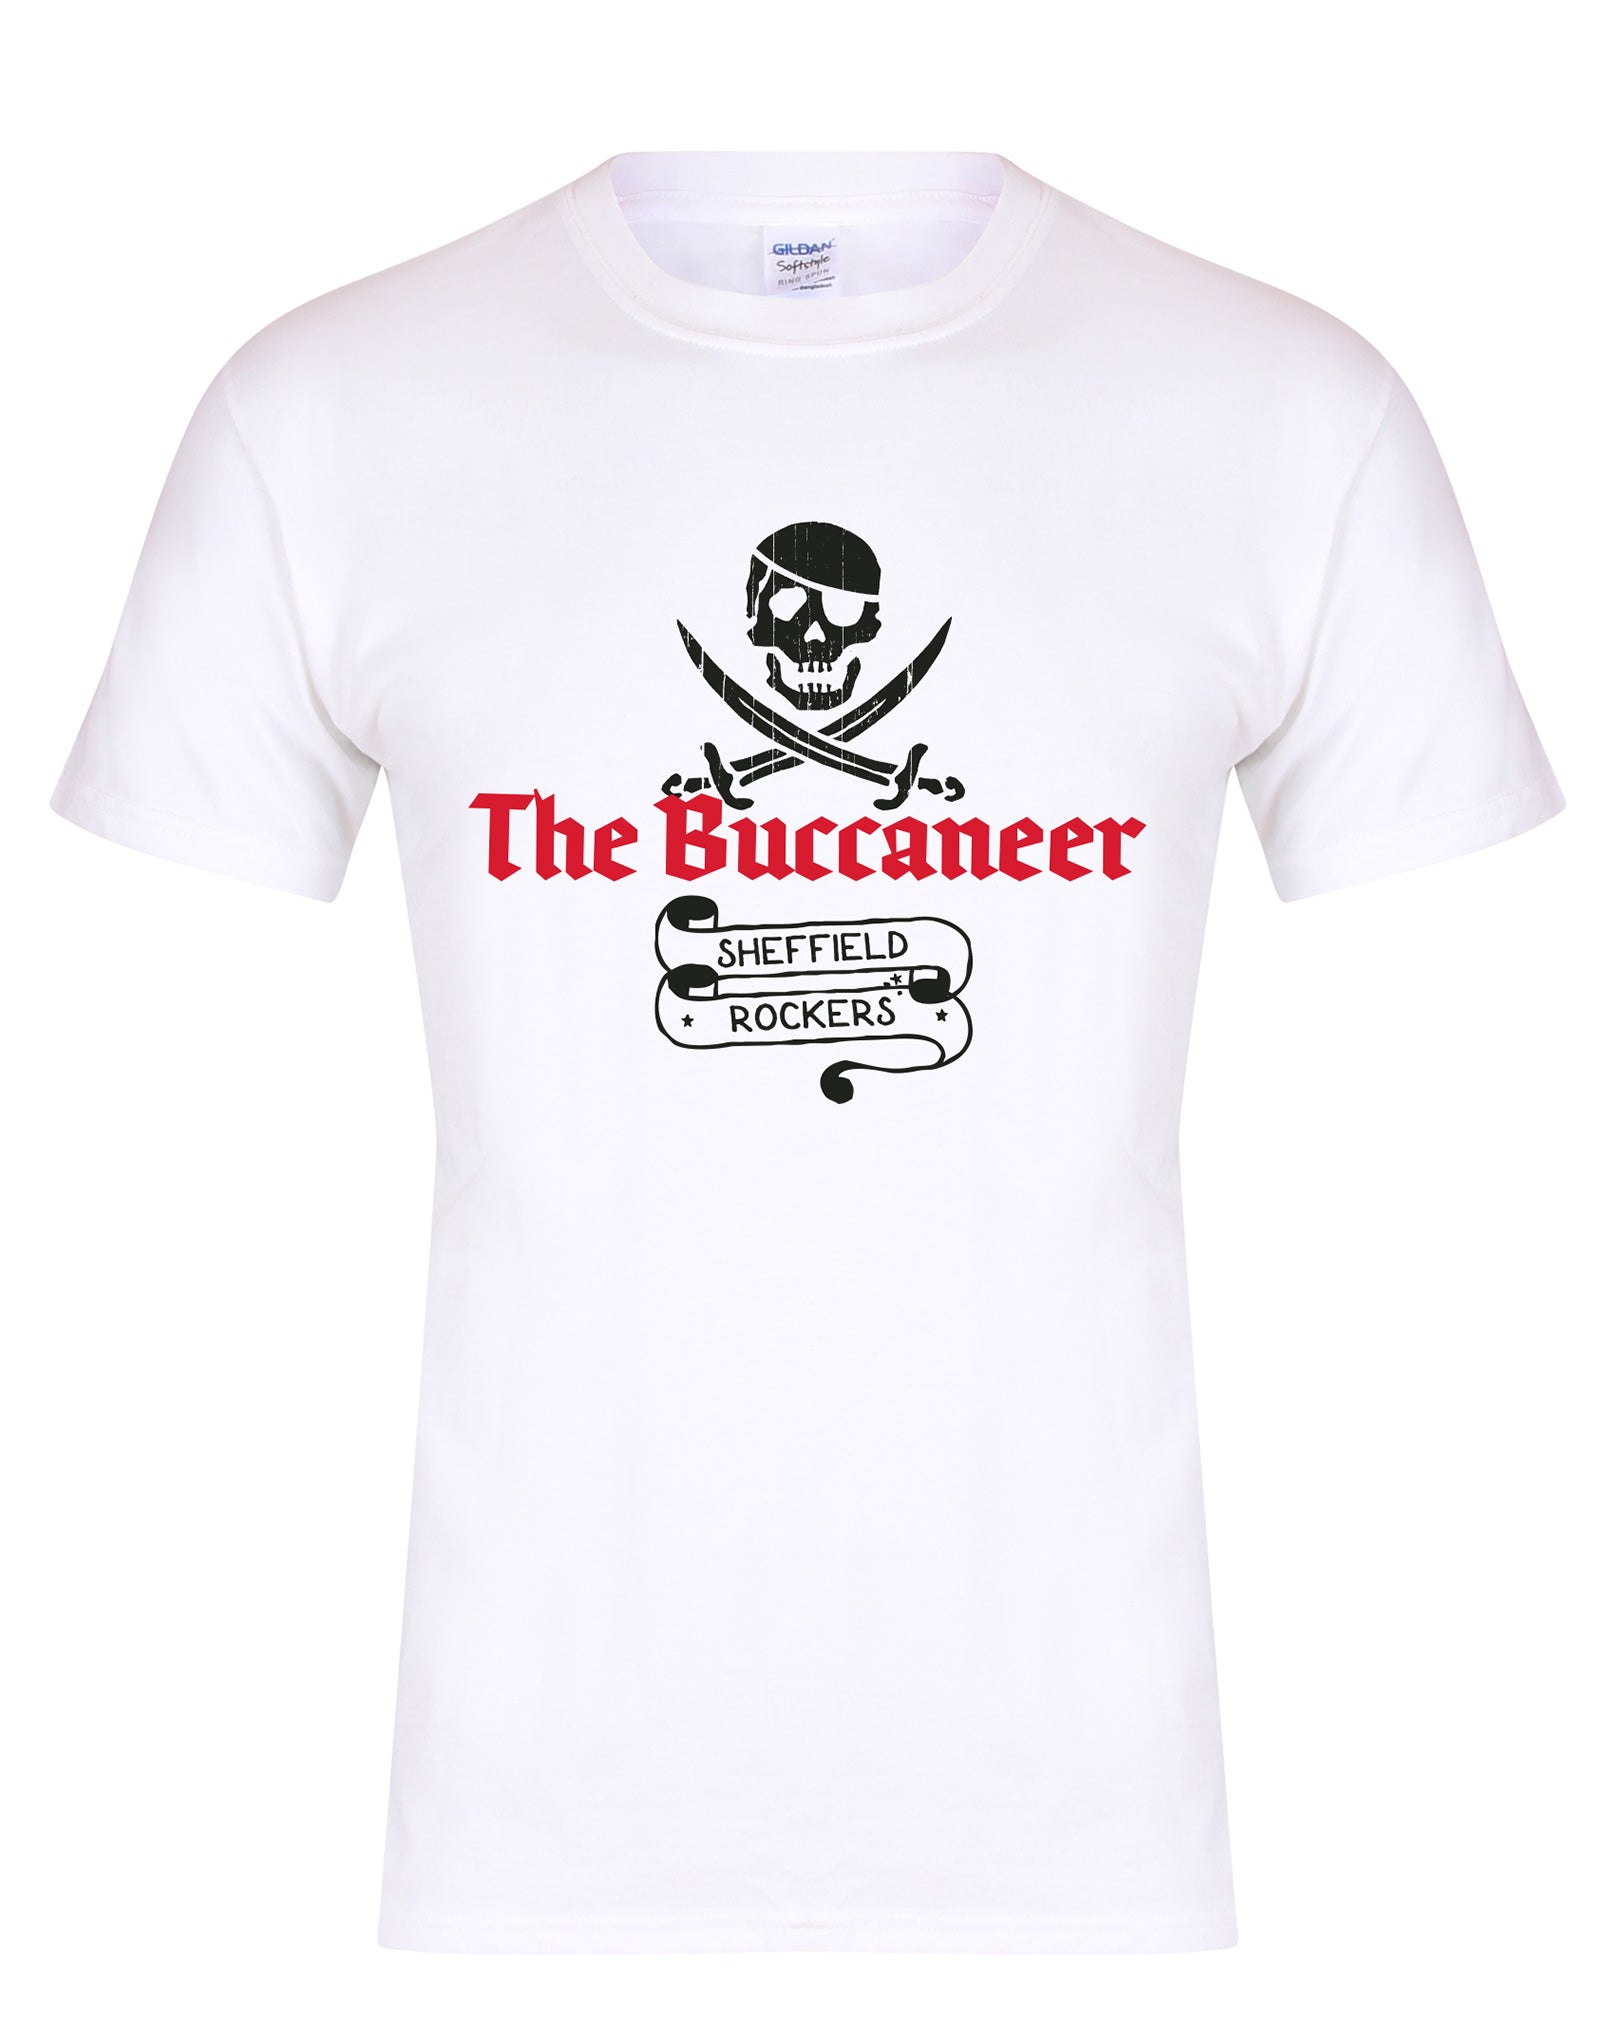 Buccaneer unisex fit T-shirt - various colours - Dirty Stop Outs